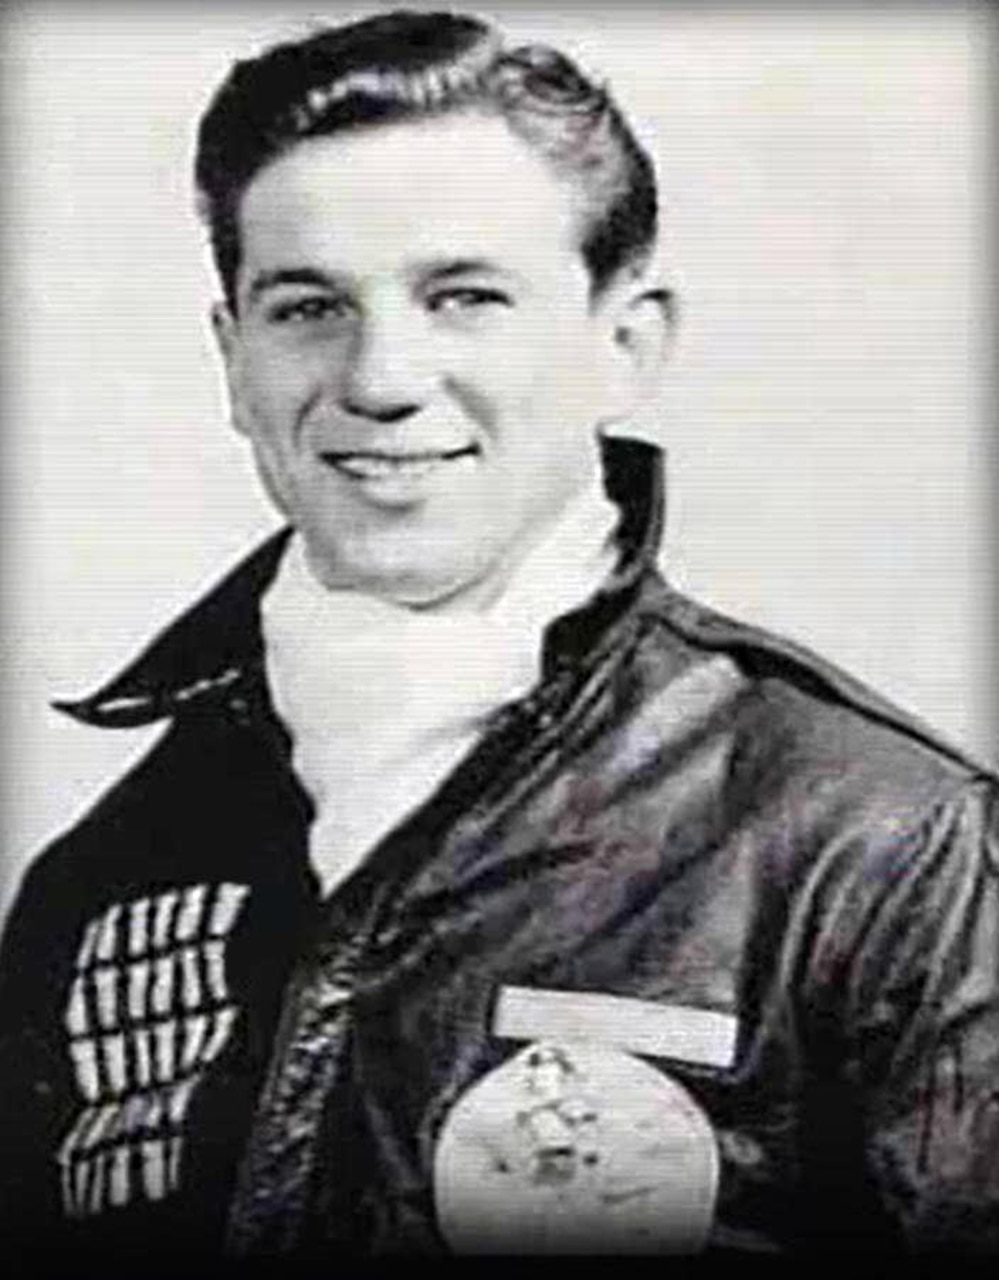 A man in a leather jacket poses for a photo.